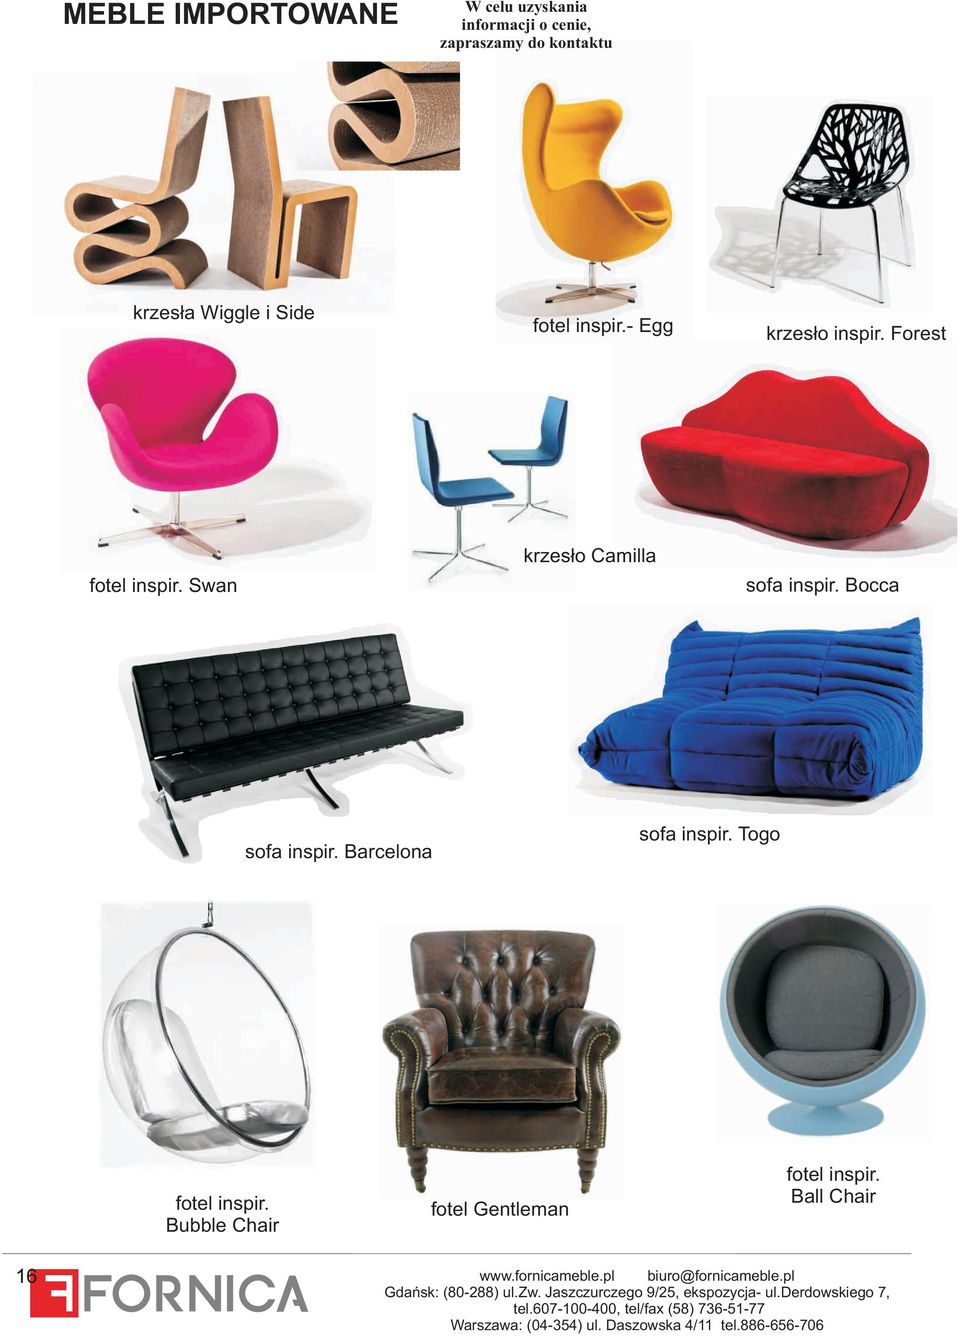 Togo fotel inspir. Bubble Chair fotel Gentleman fotel inspir. Ball Chair www.fornicameble.pl biuro@fornicameble.